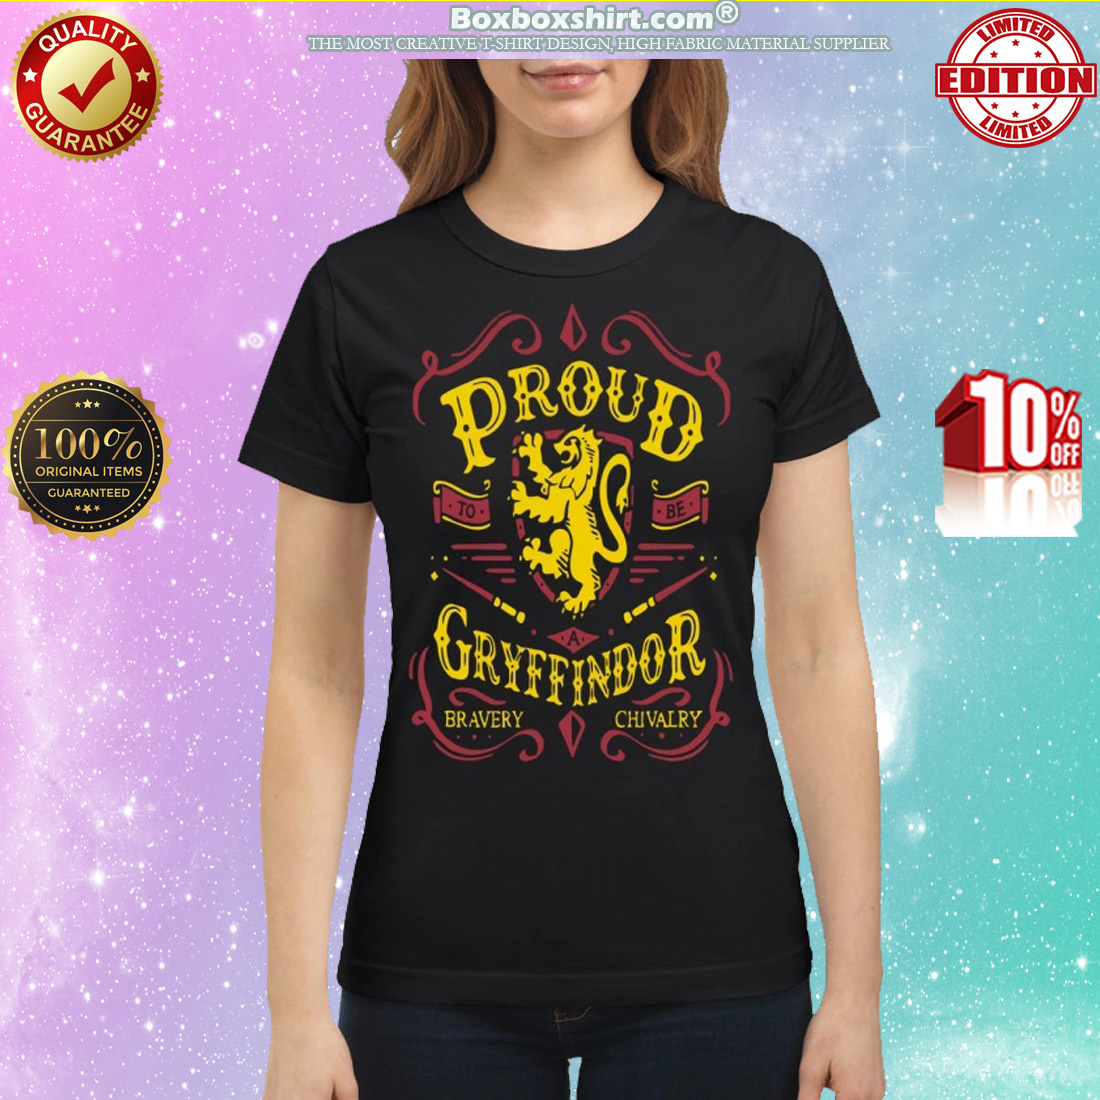 Proud to be a Gryffindor bravery chivalry classic shirt